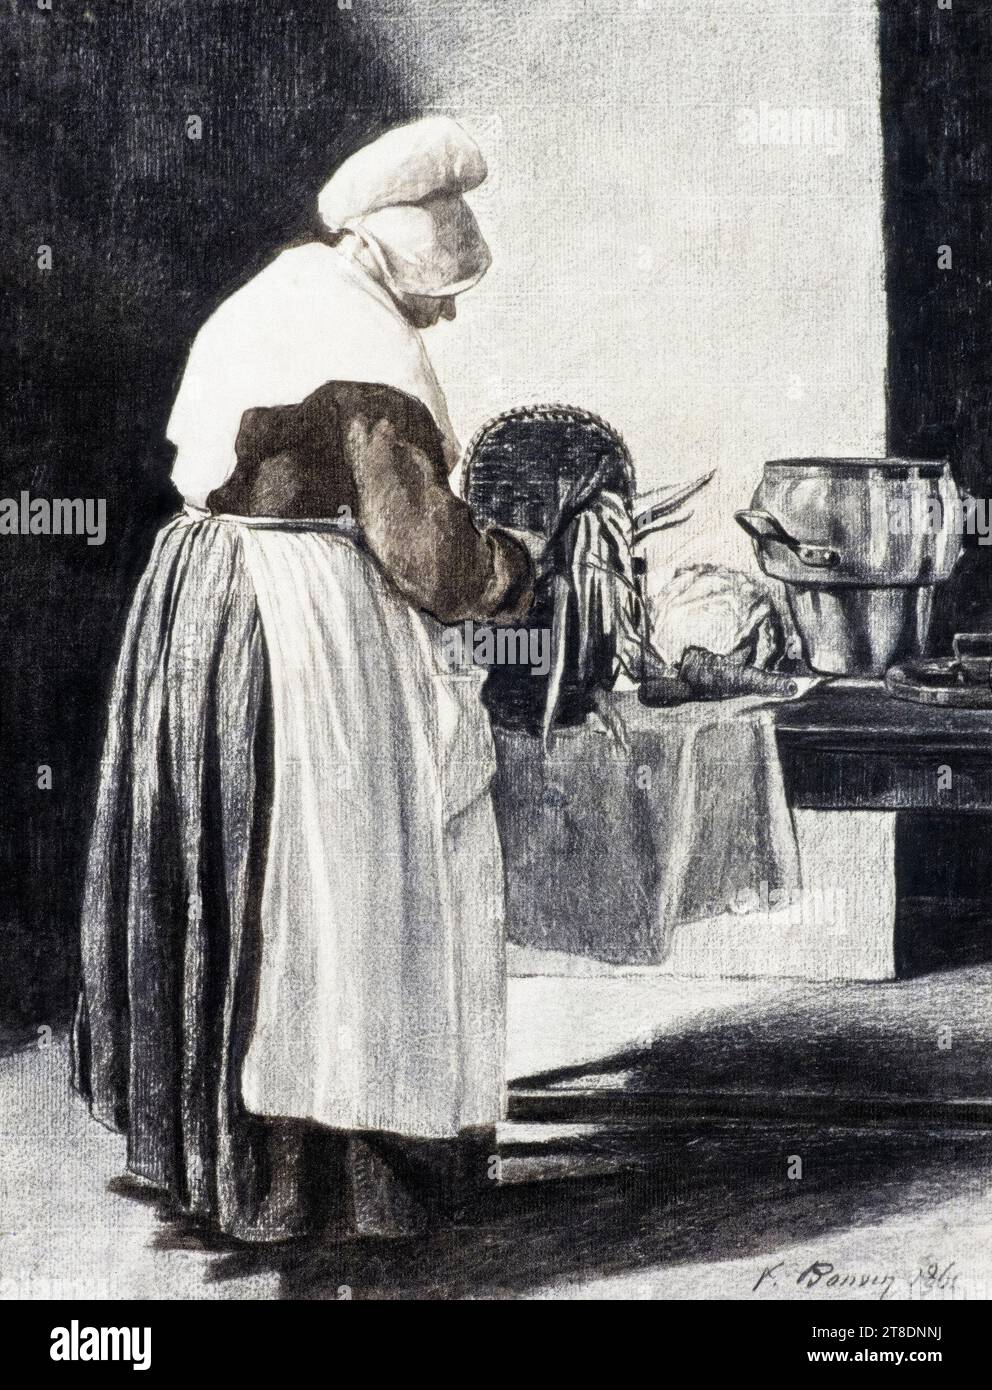 François Bonvin, The Cook, drawing in charcoal and chalk, 1861 Stock Photo